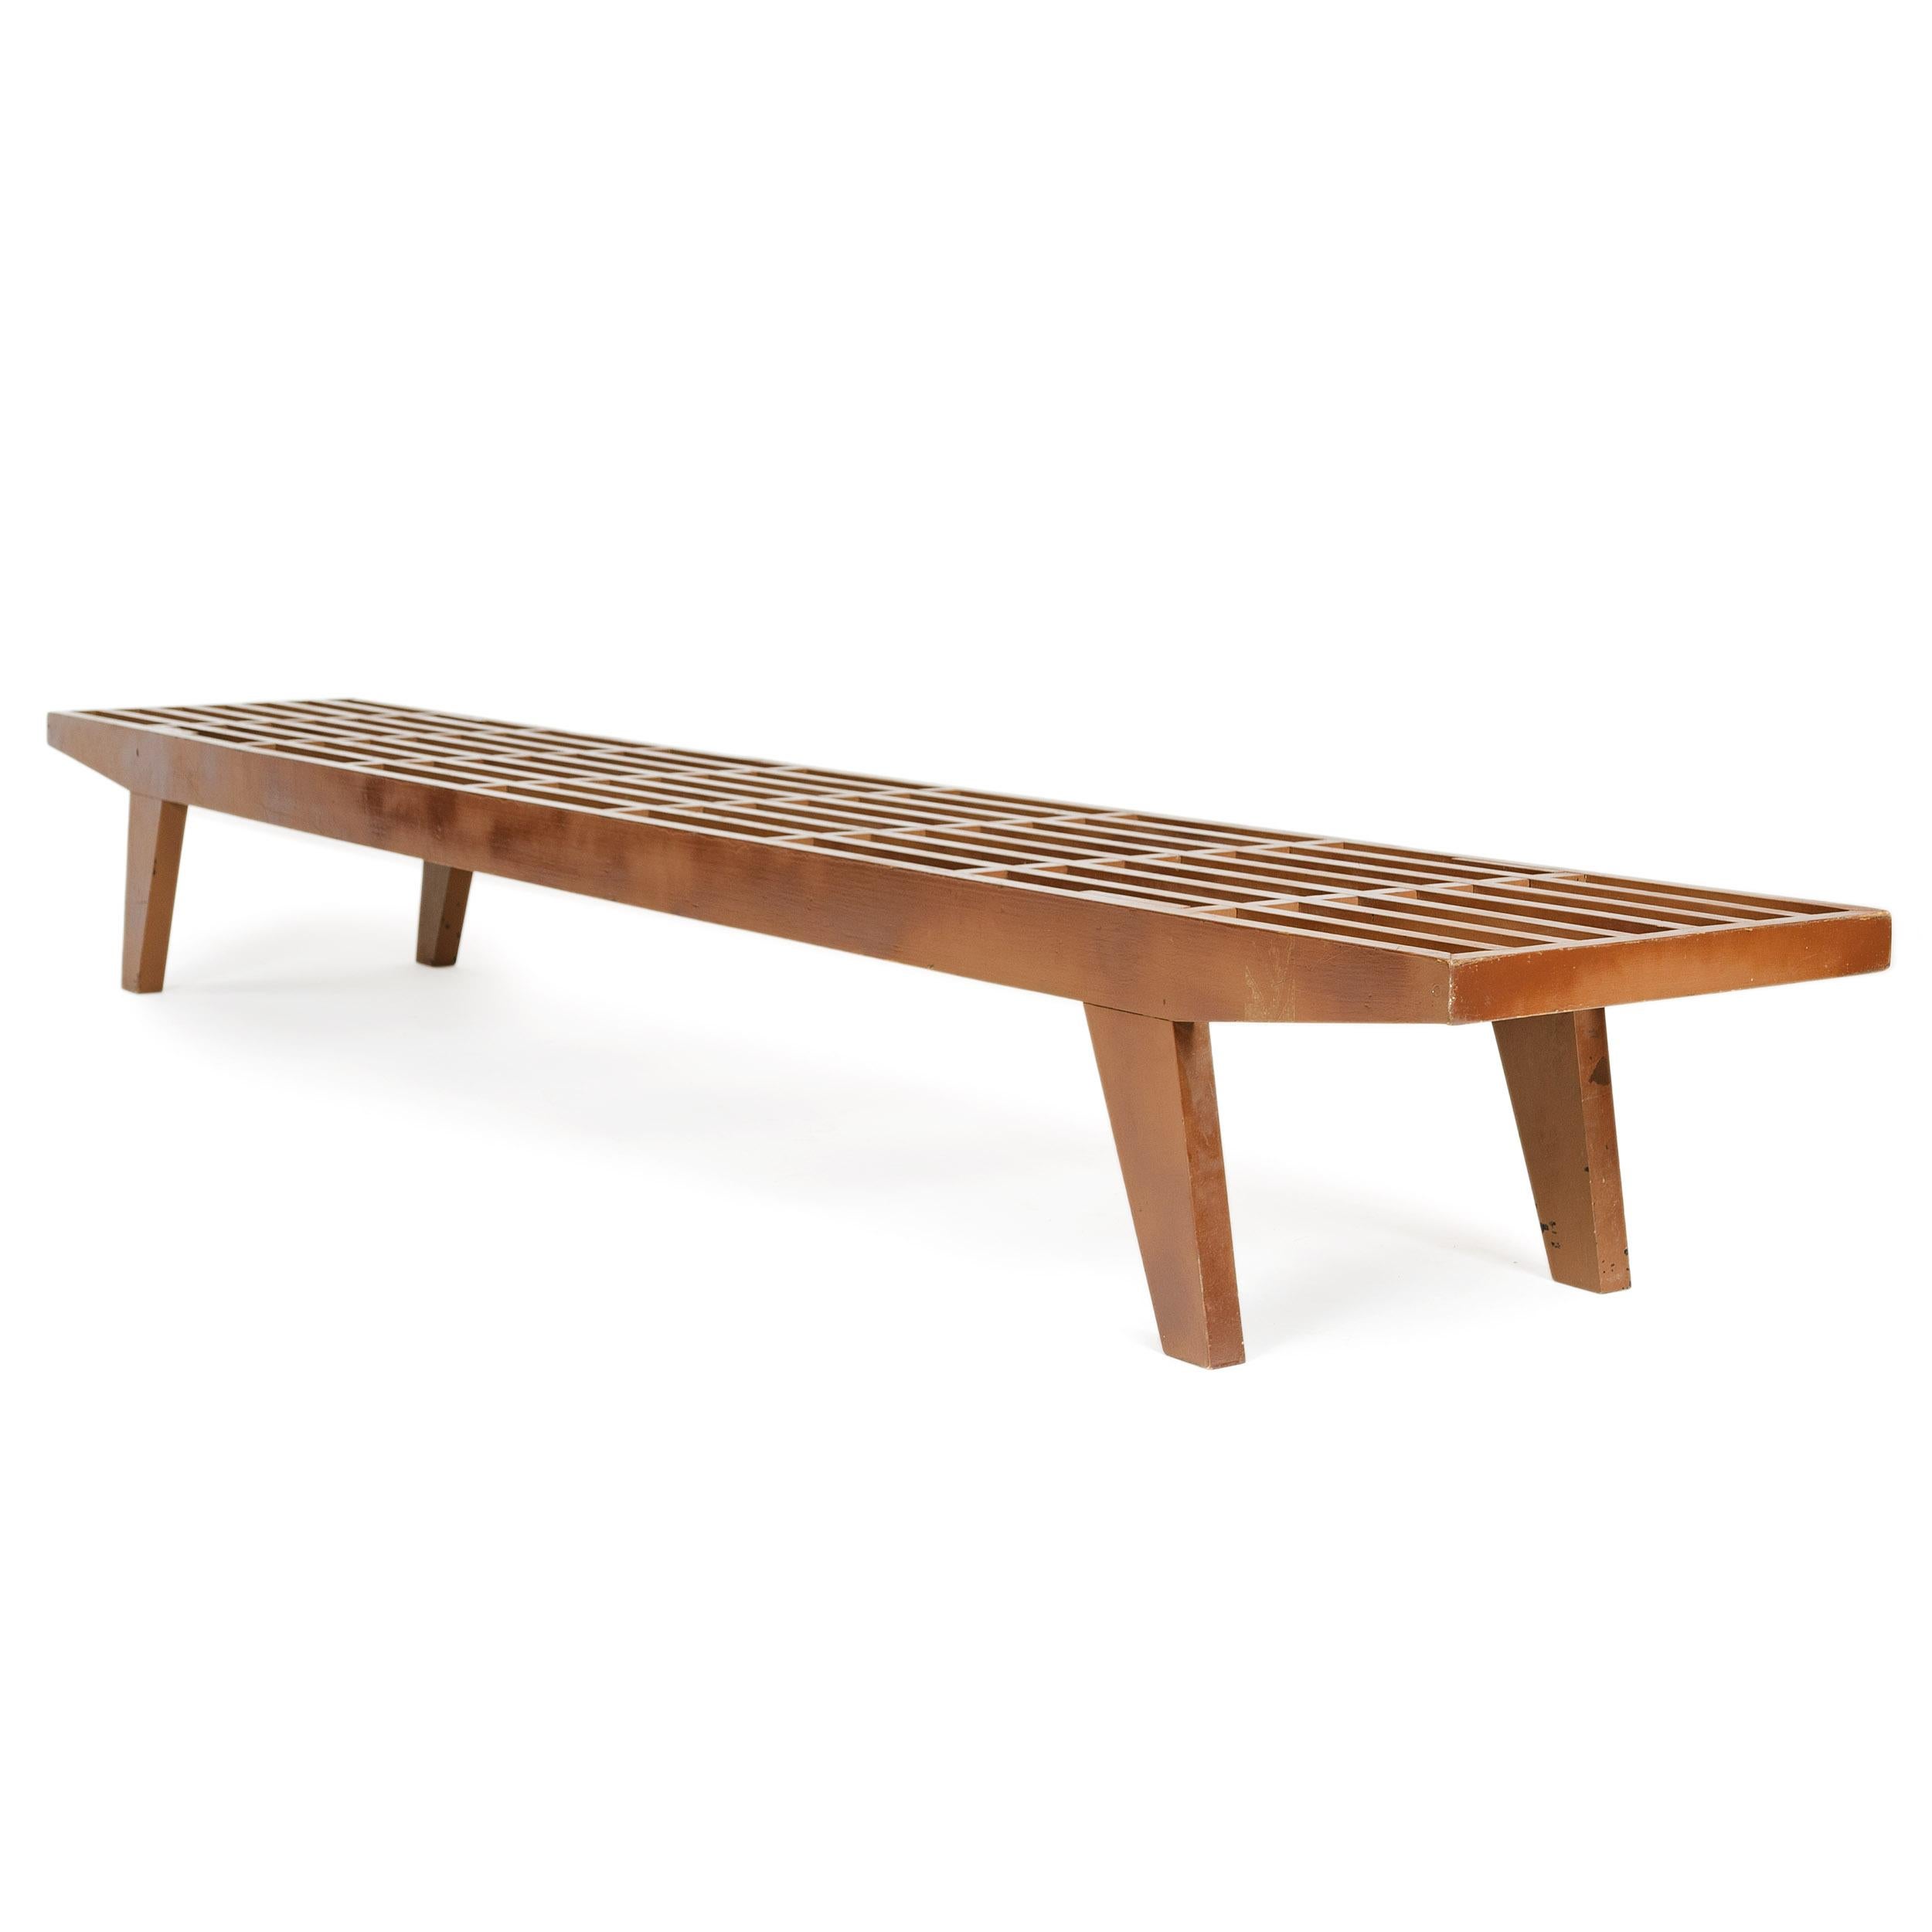 A painted, modernist slat bench or low table.